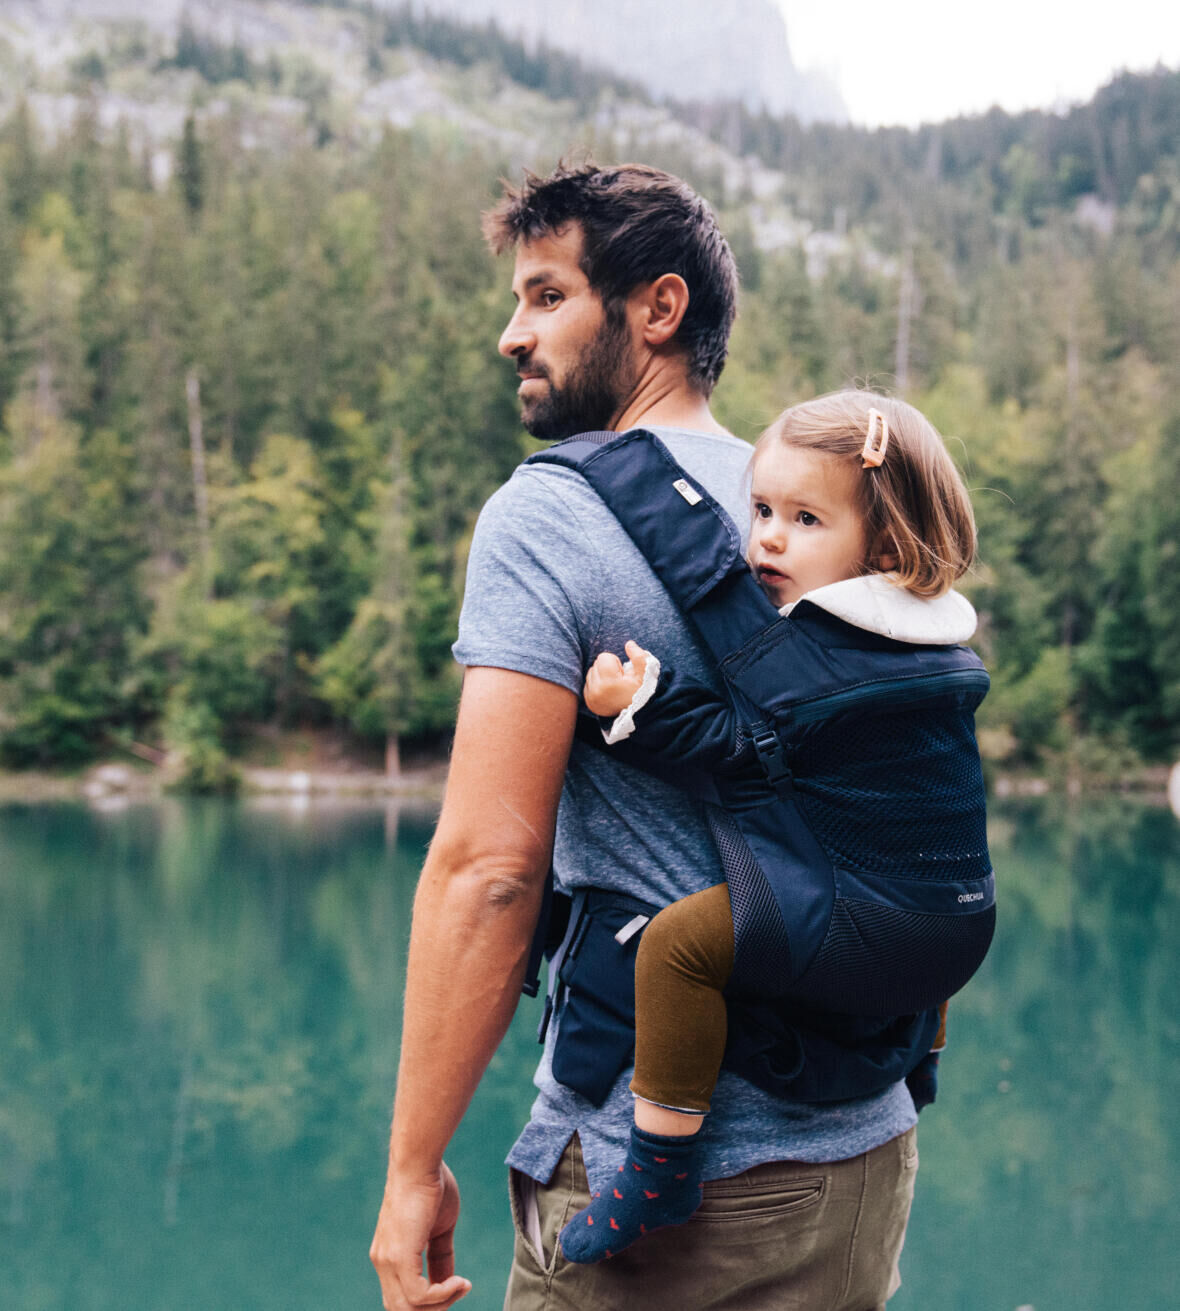 Hiking with baby:our guide 